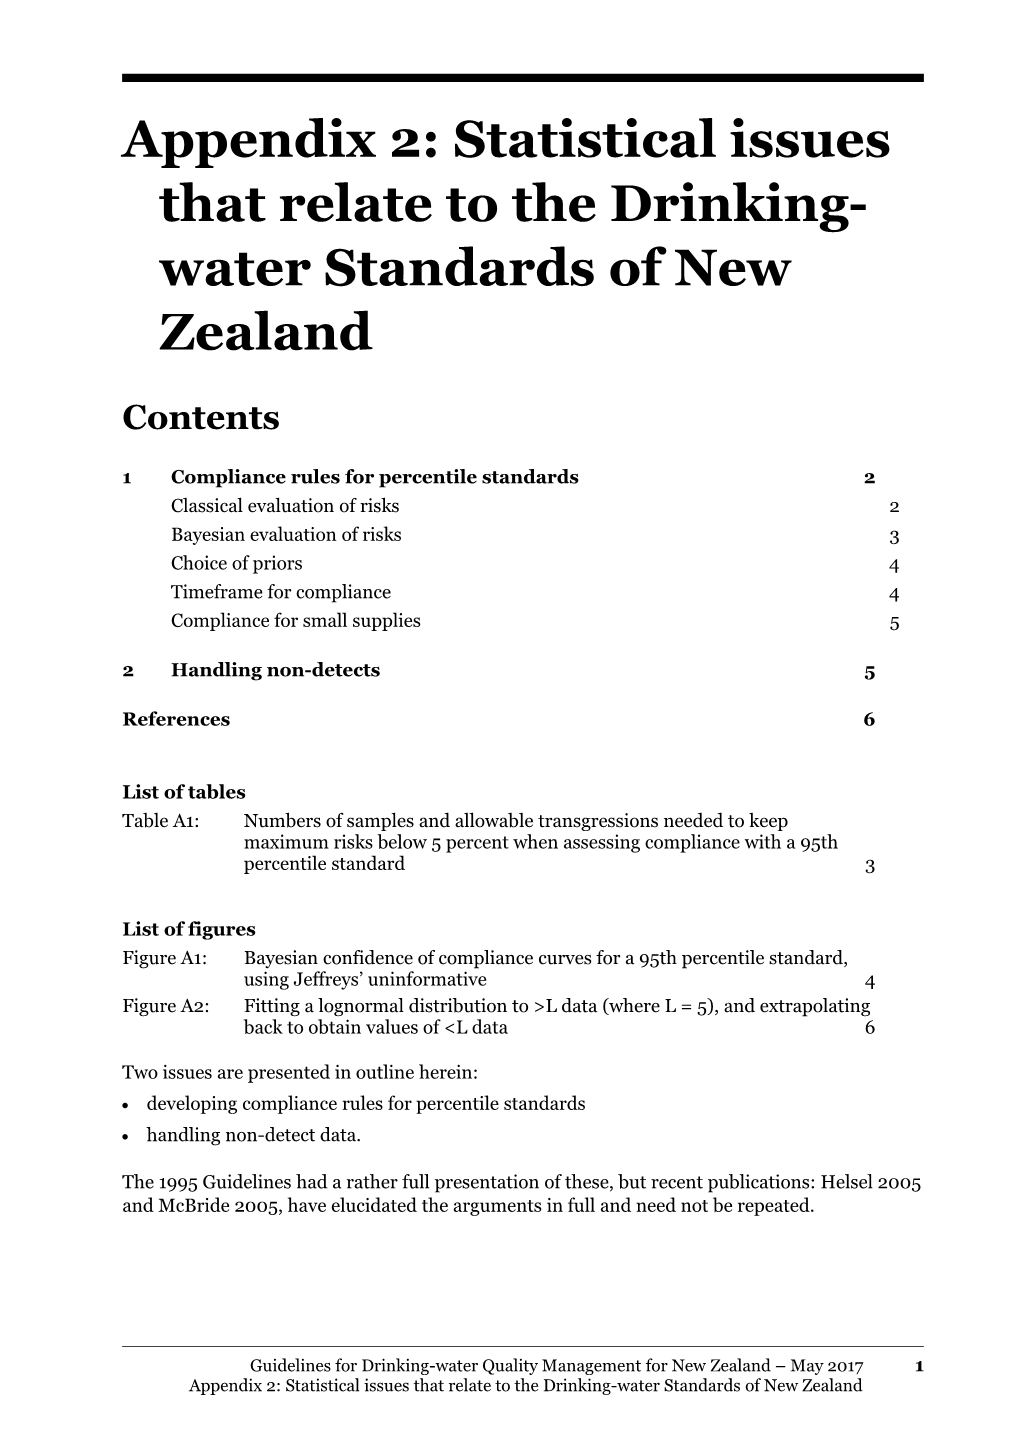 Appendix 2: Statistical Issues That Relate to the Drinking-Water Standards of NZ